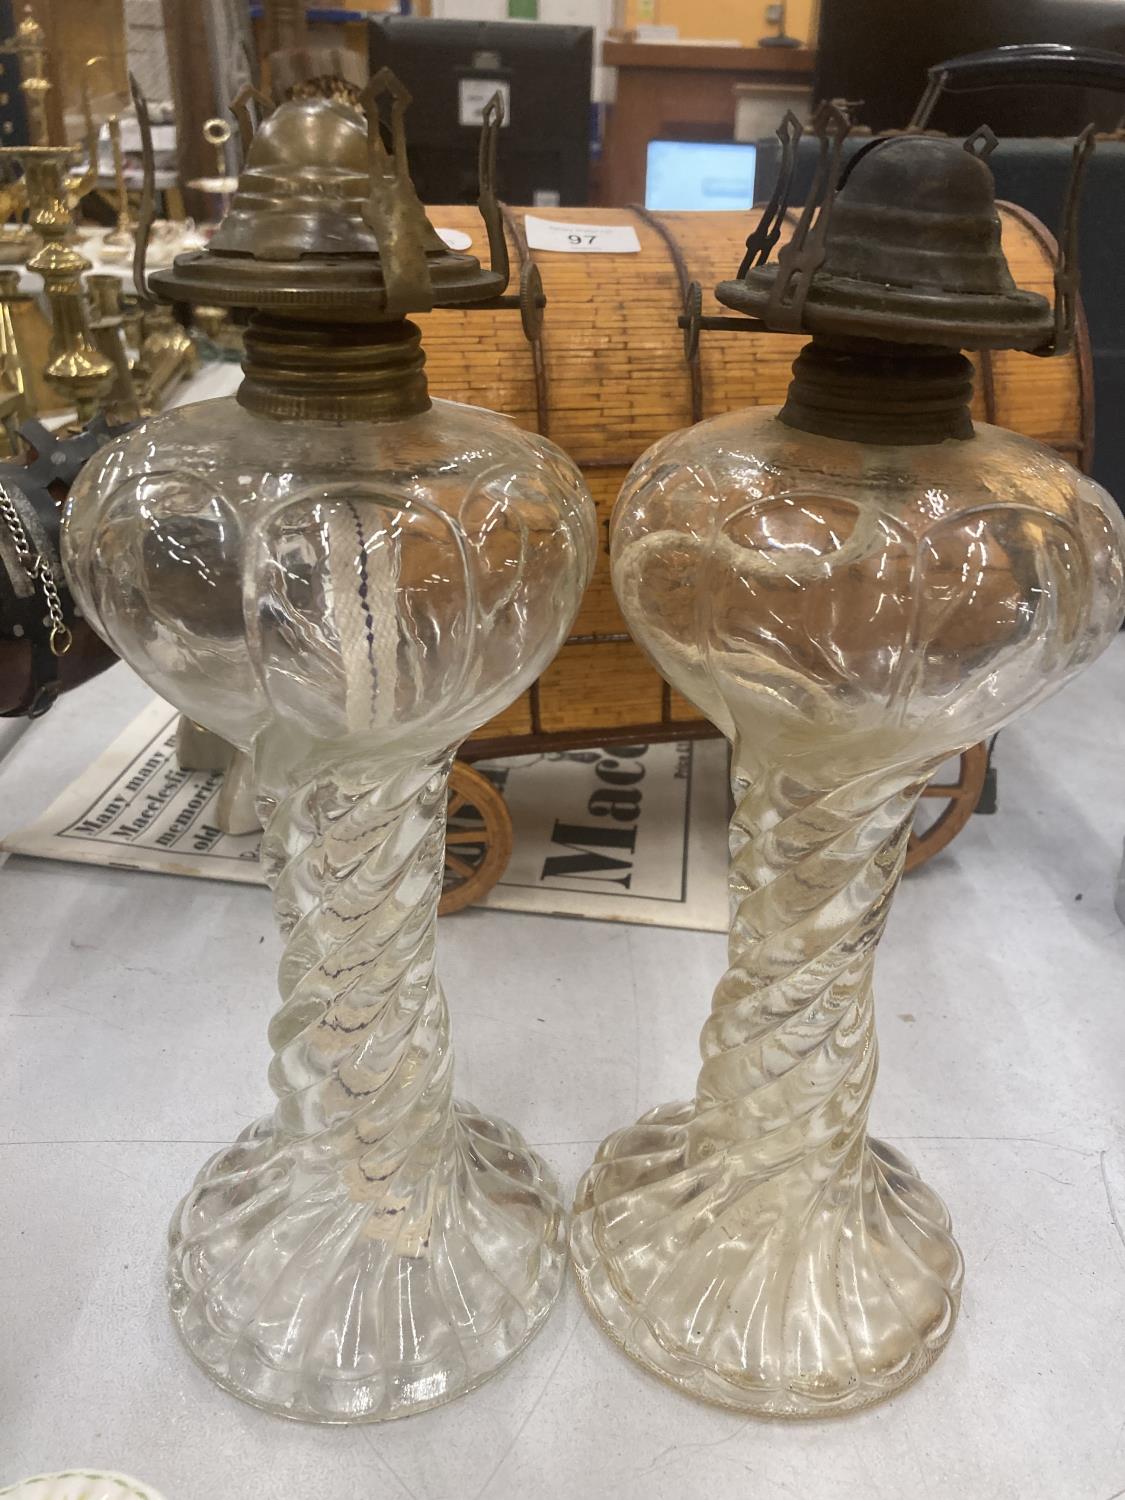 A PAIR OF VINTAGE GLASS OIL LAMPS WITH BARLEY TWIST STEM